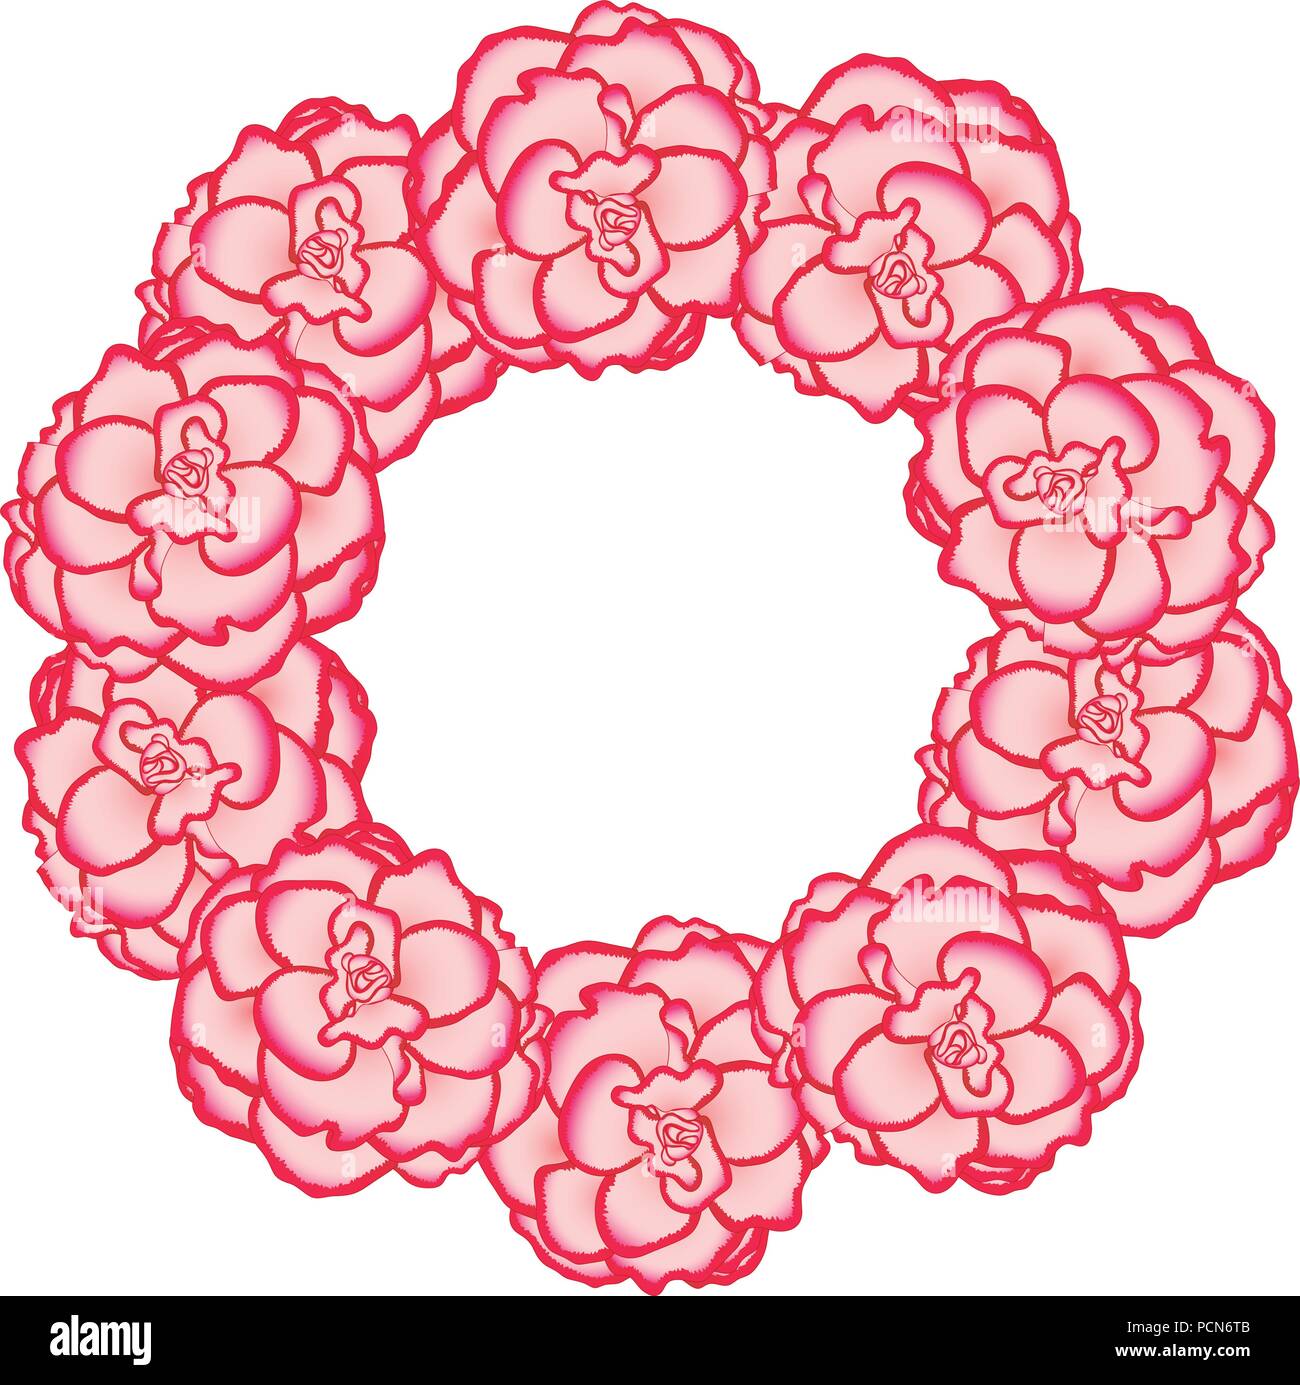 Pink Begonia Flower, Picotee First Love Wreath. Vector Illustration. Stock Vector